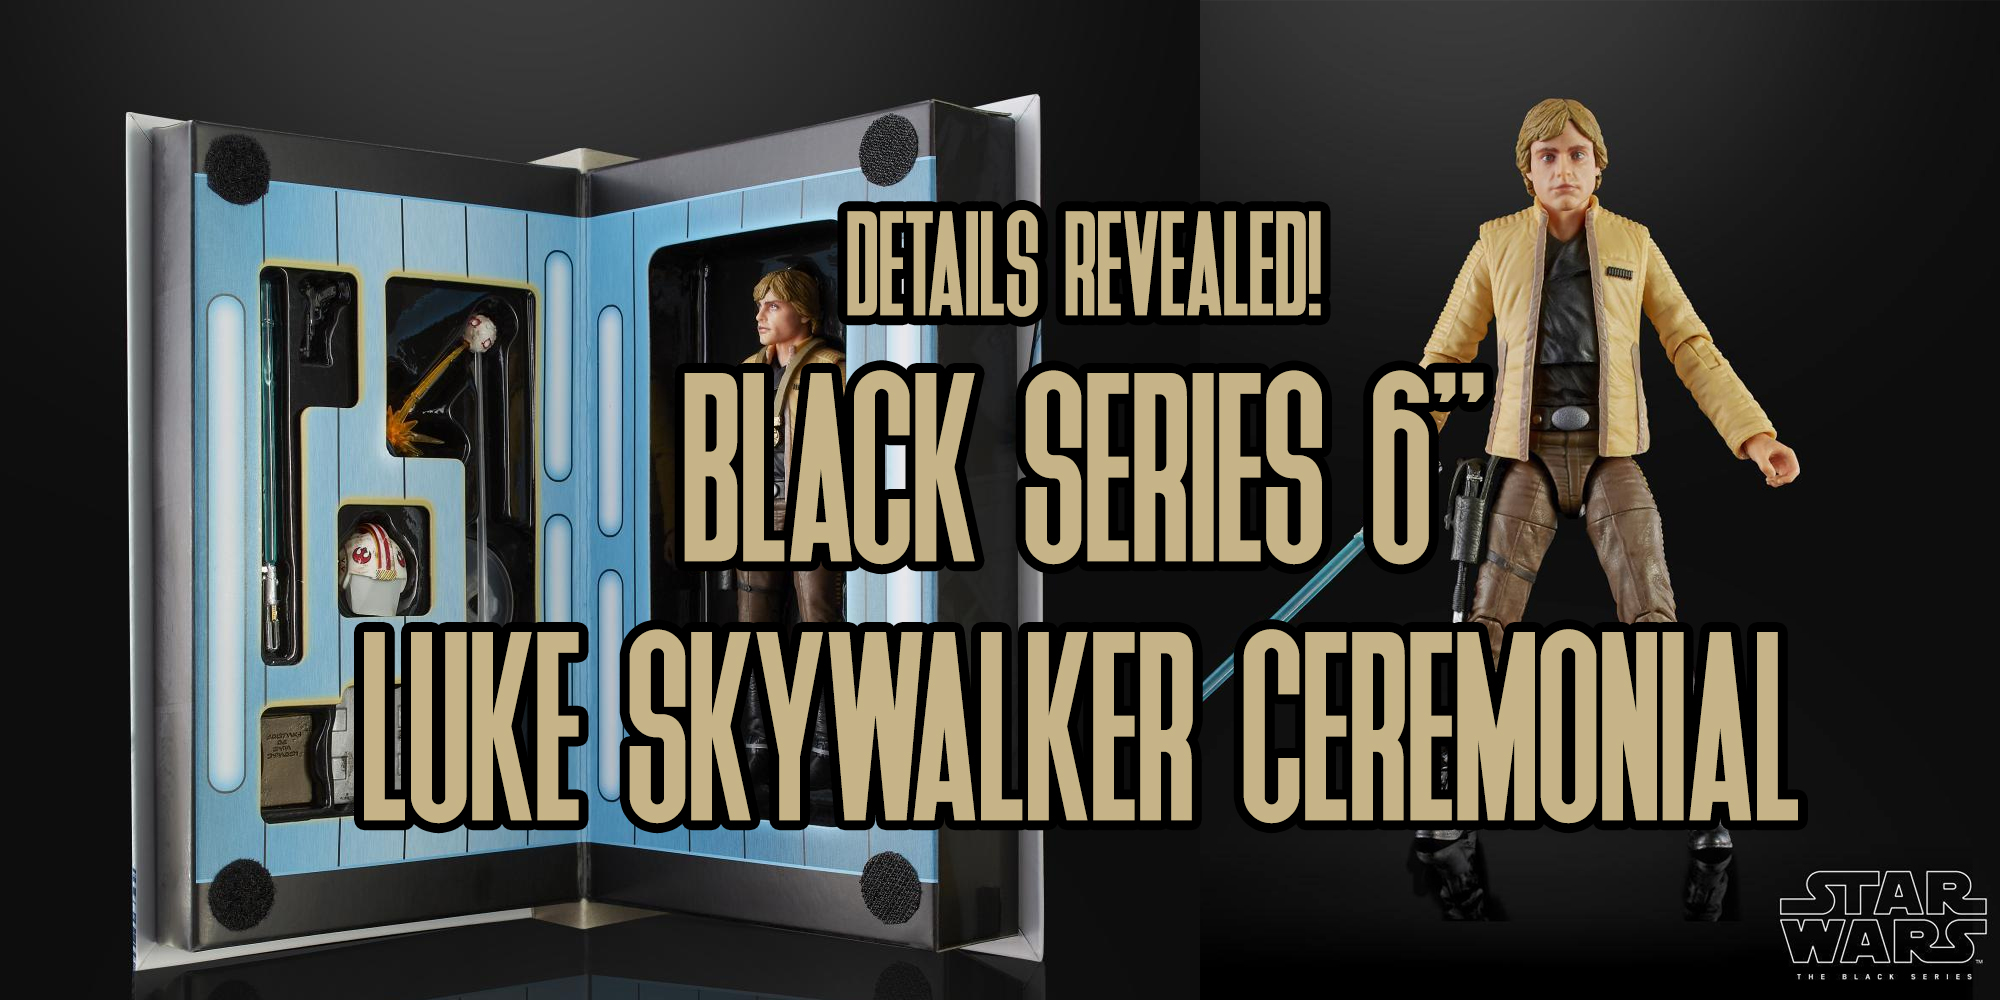 Black Series 6" Con Exclusive Luke In Ceremonial Outfit Announced!